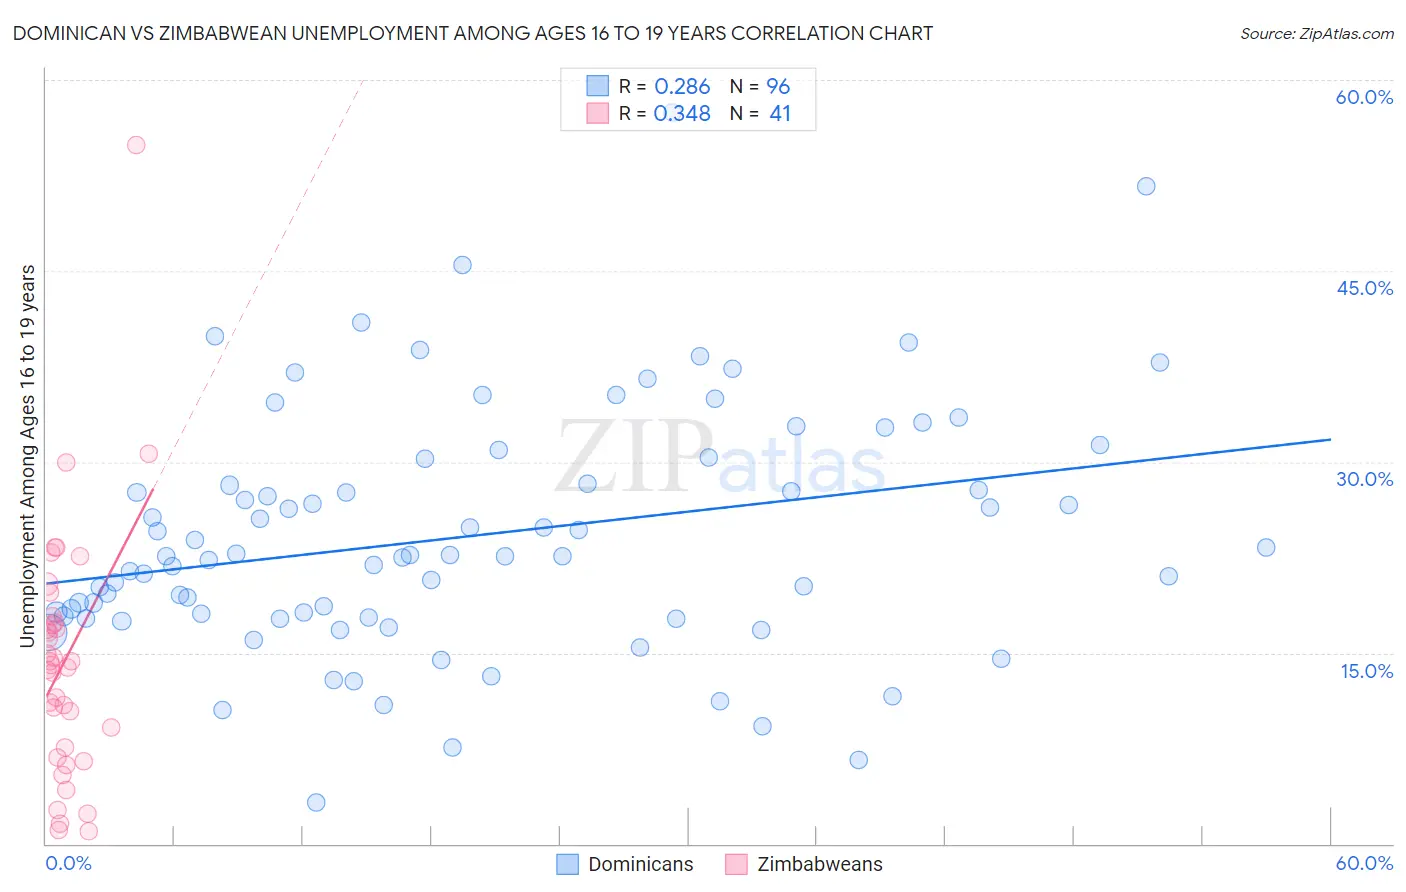 Dominican vs Zimbabwean Unemployment Among Ages 16 to 19 years